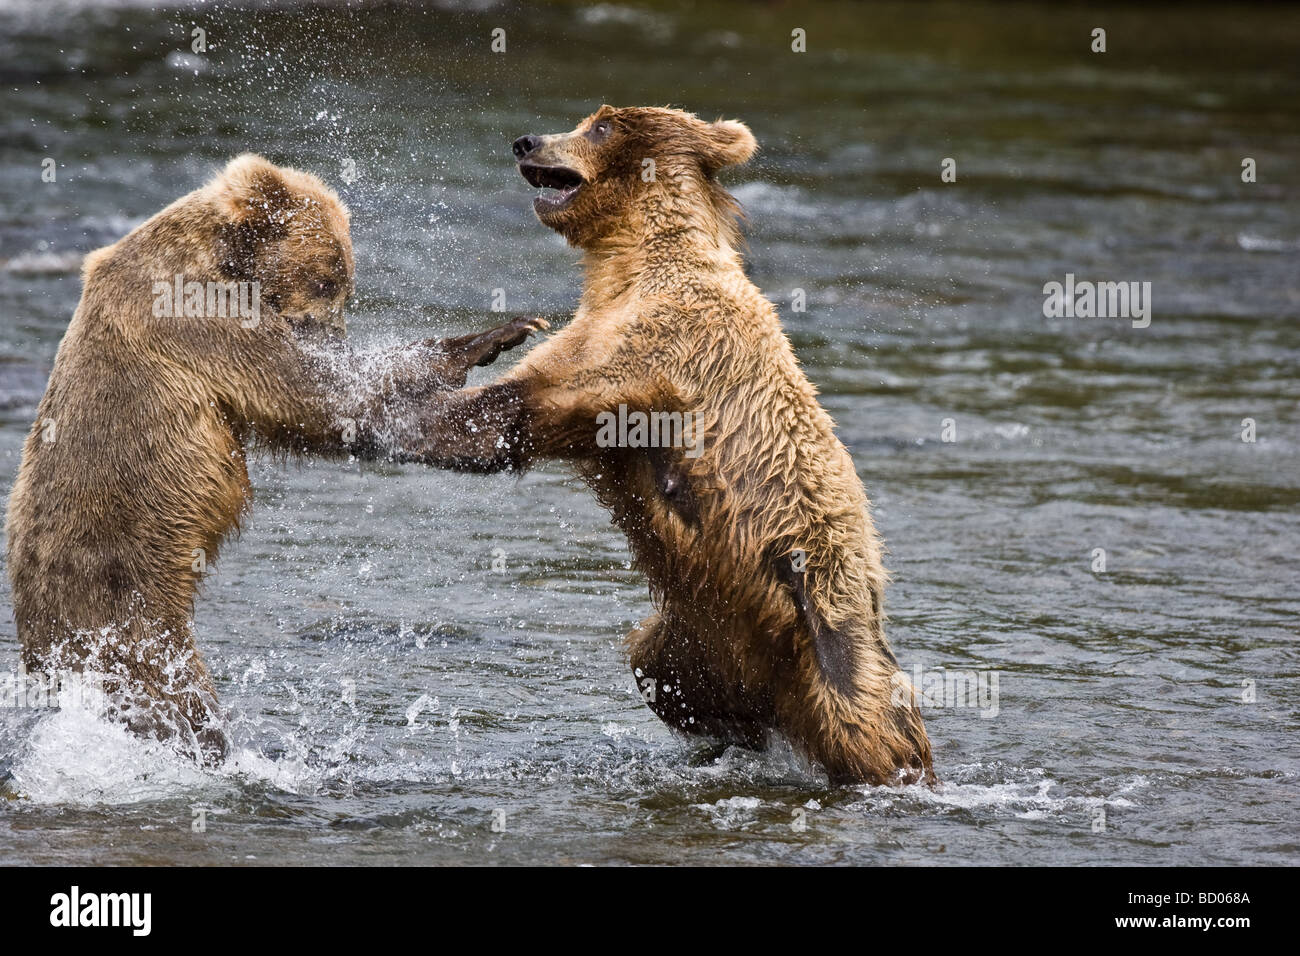 Two Brown Bears (Grizzly Bears) (Ursus arctos) fight in the Brooks River of Katmai National Park, Alaska. Stock Photo